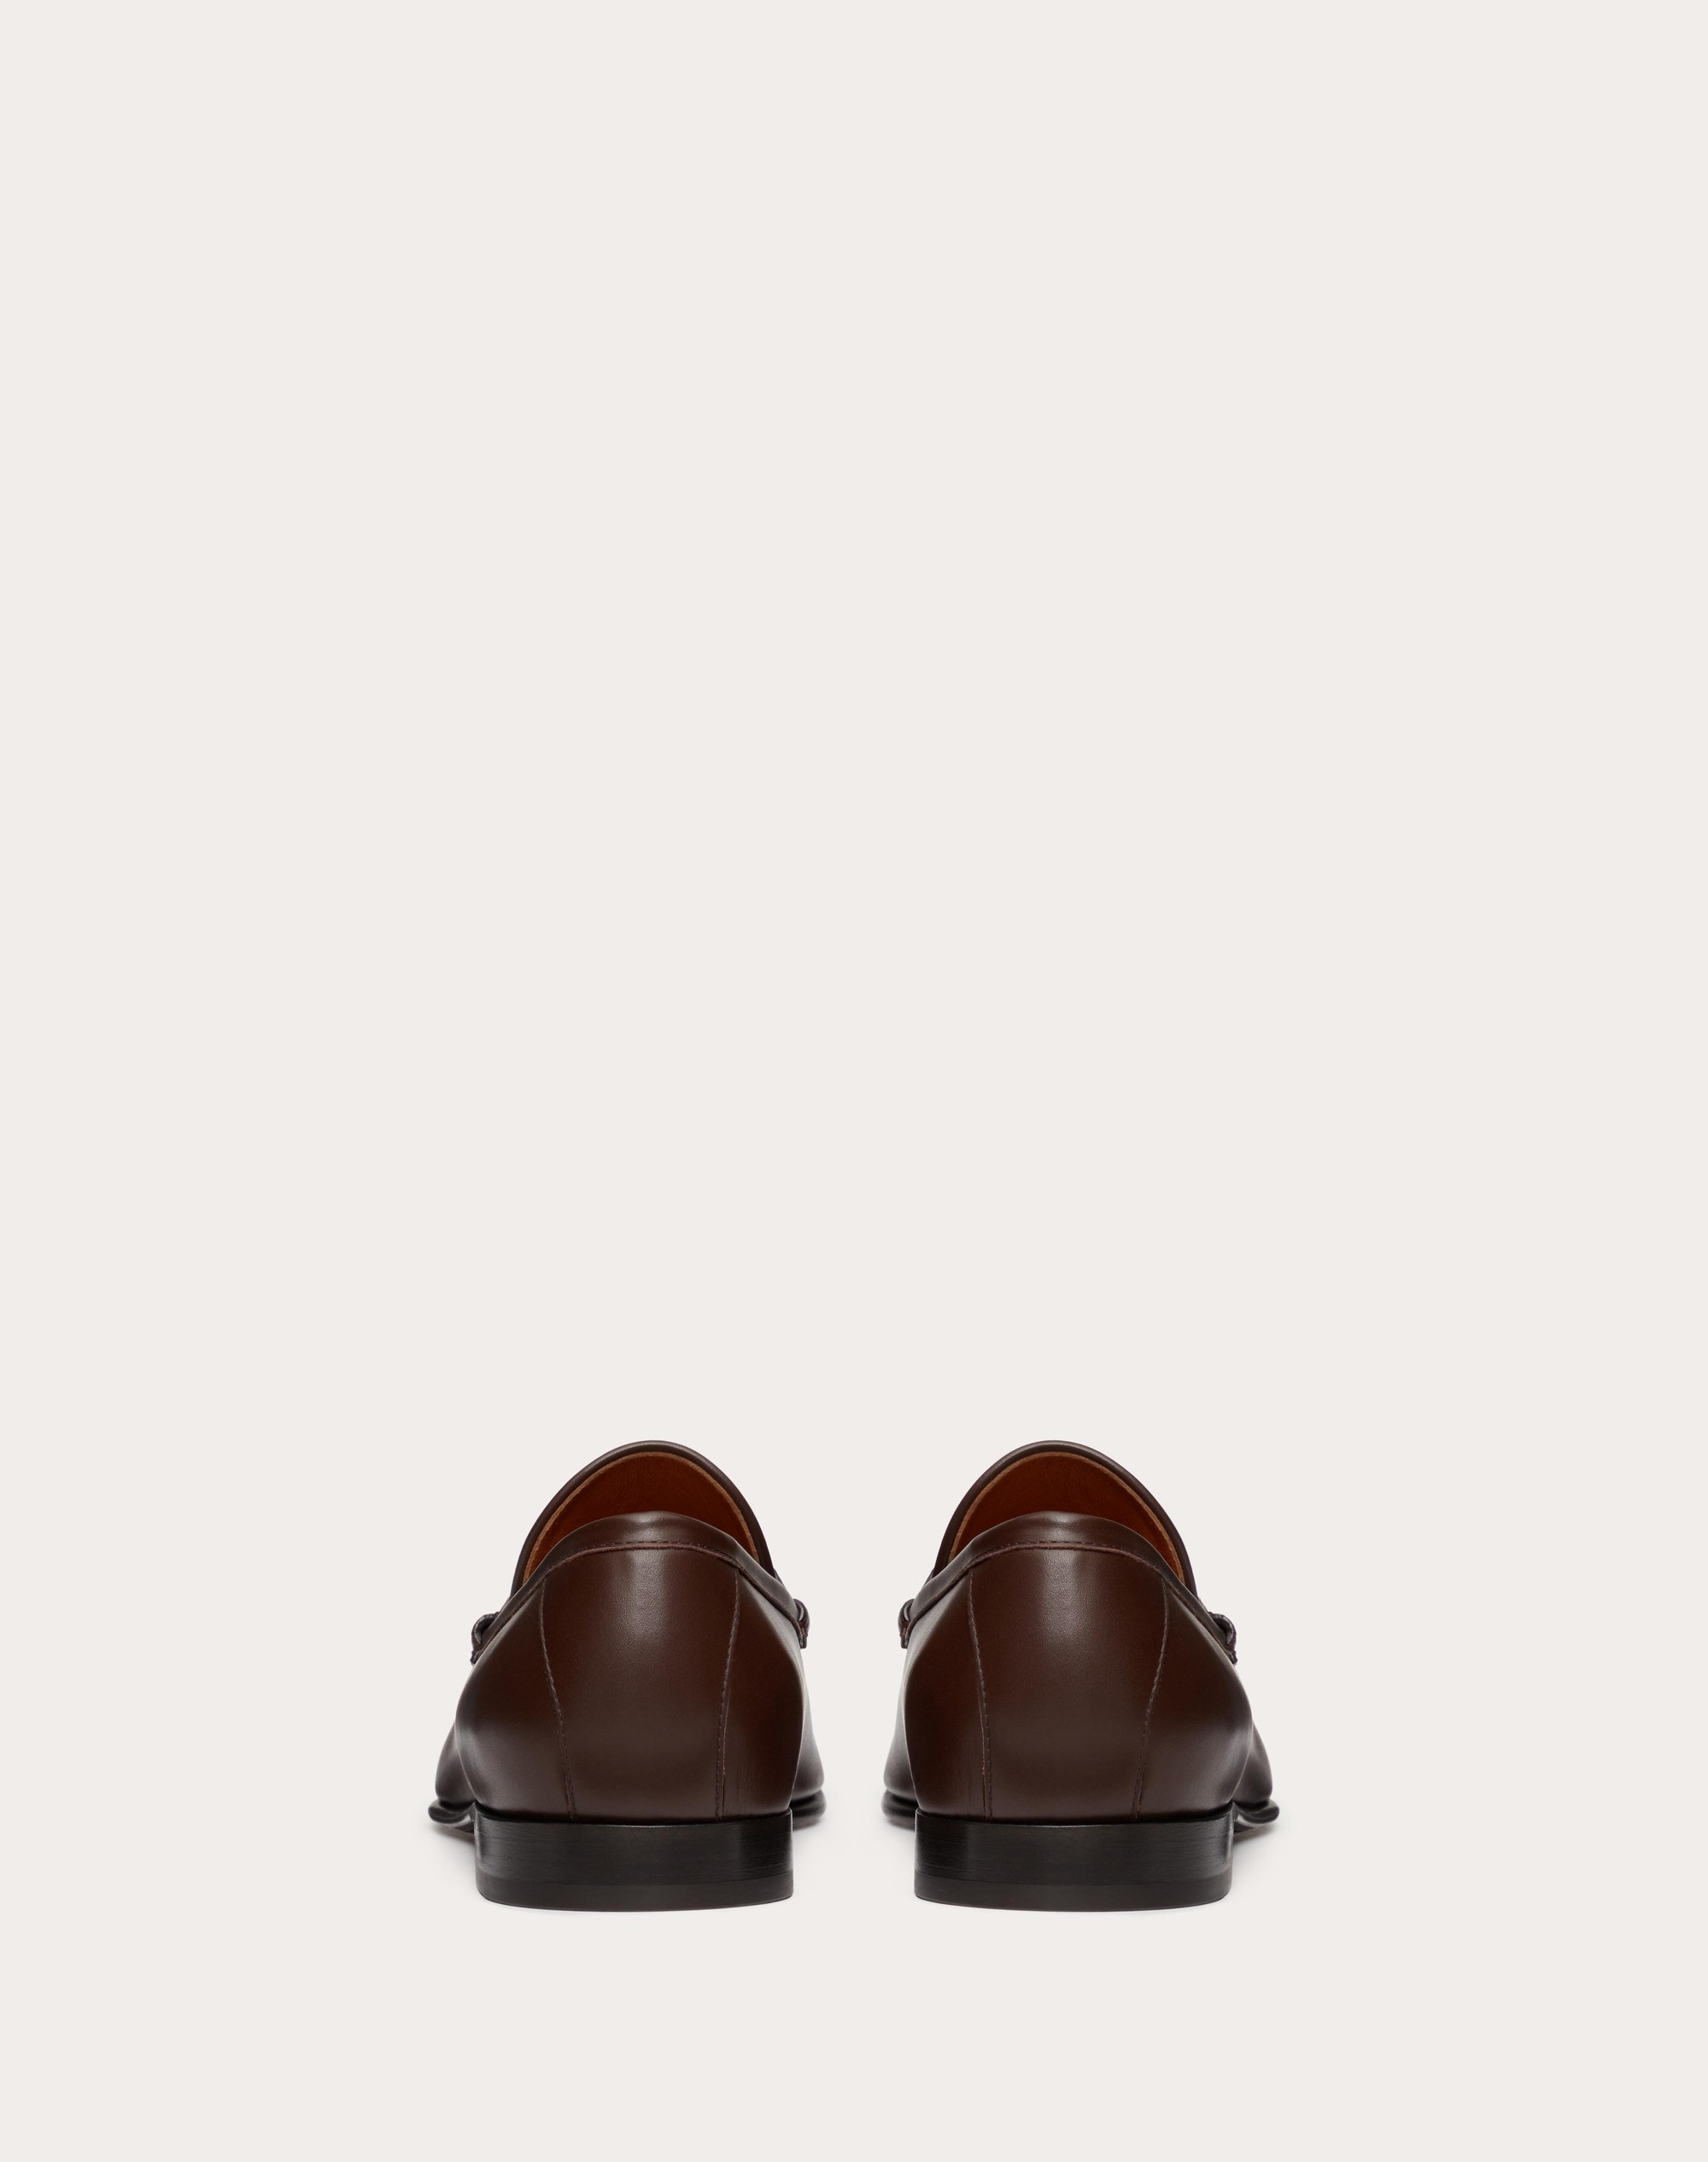 VLOGO THE BOLD EDITION CALFSKIN LEATHER LOAFER - 3